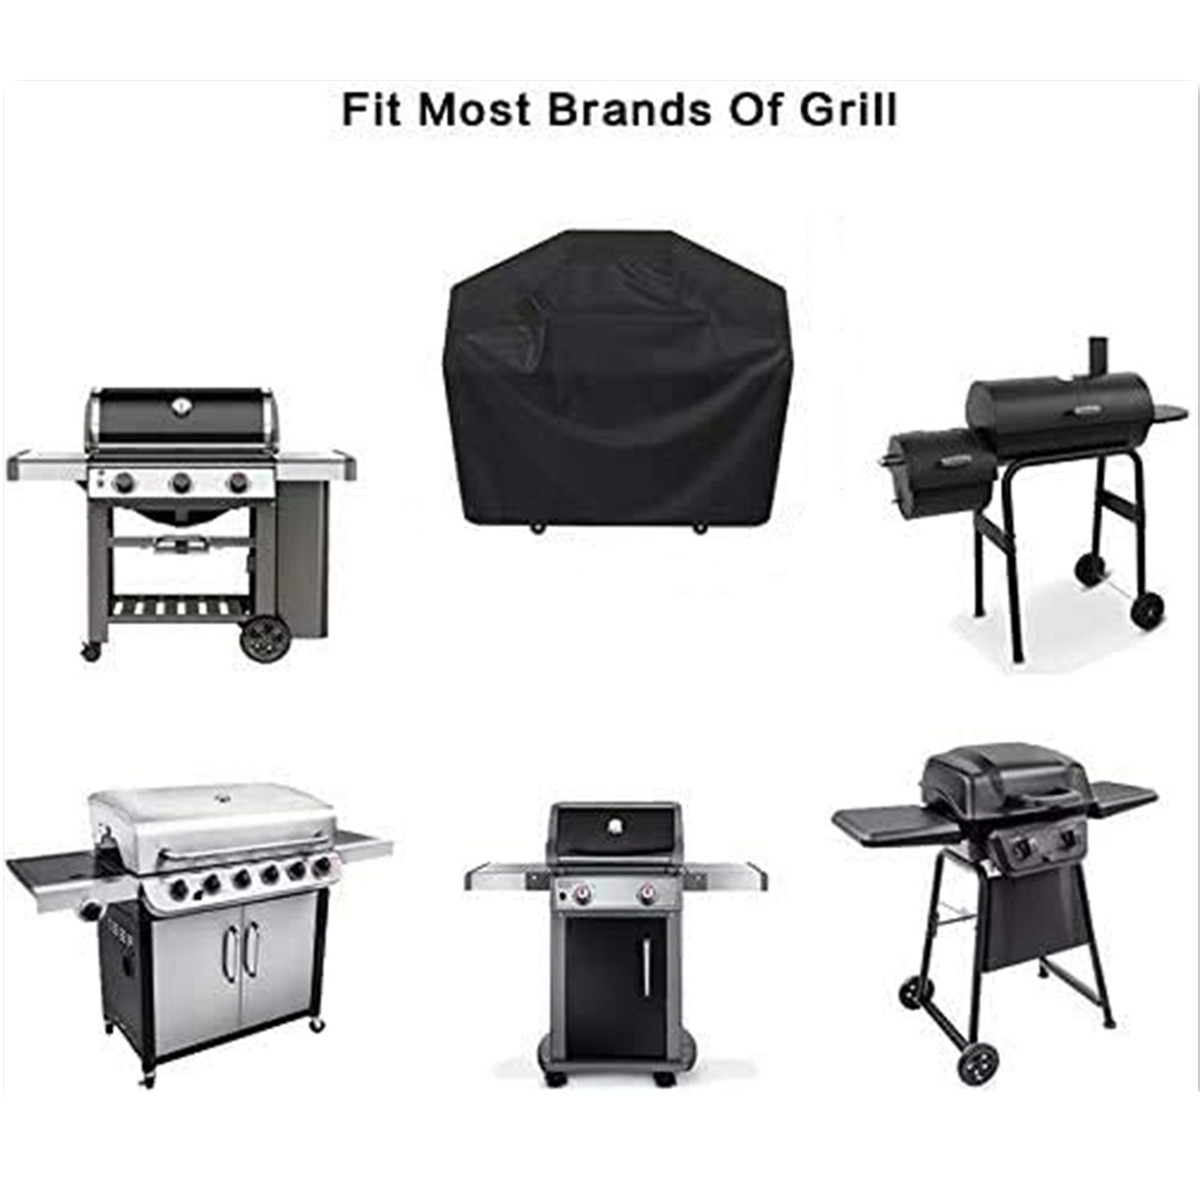 Waterproof-Black-Barbecue-Cover-Anti-Dust-Rain-Cover-Garden-Yard-Grill-Cover-Protector-For-Outdoor-B-1742519-4